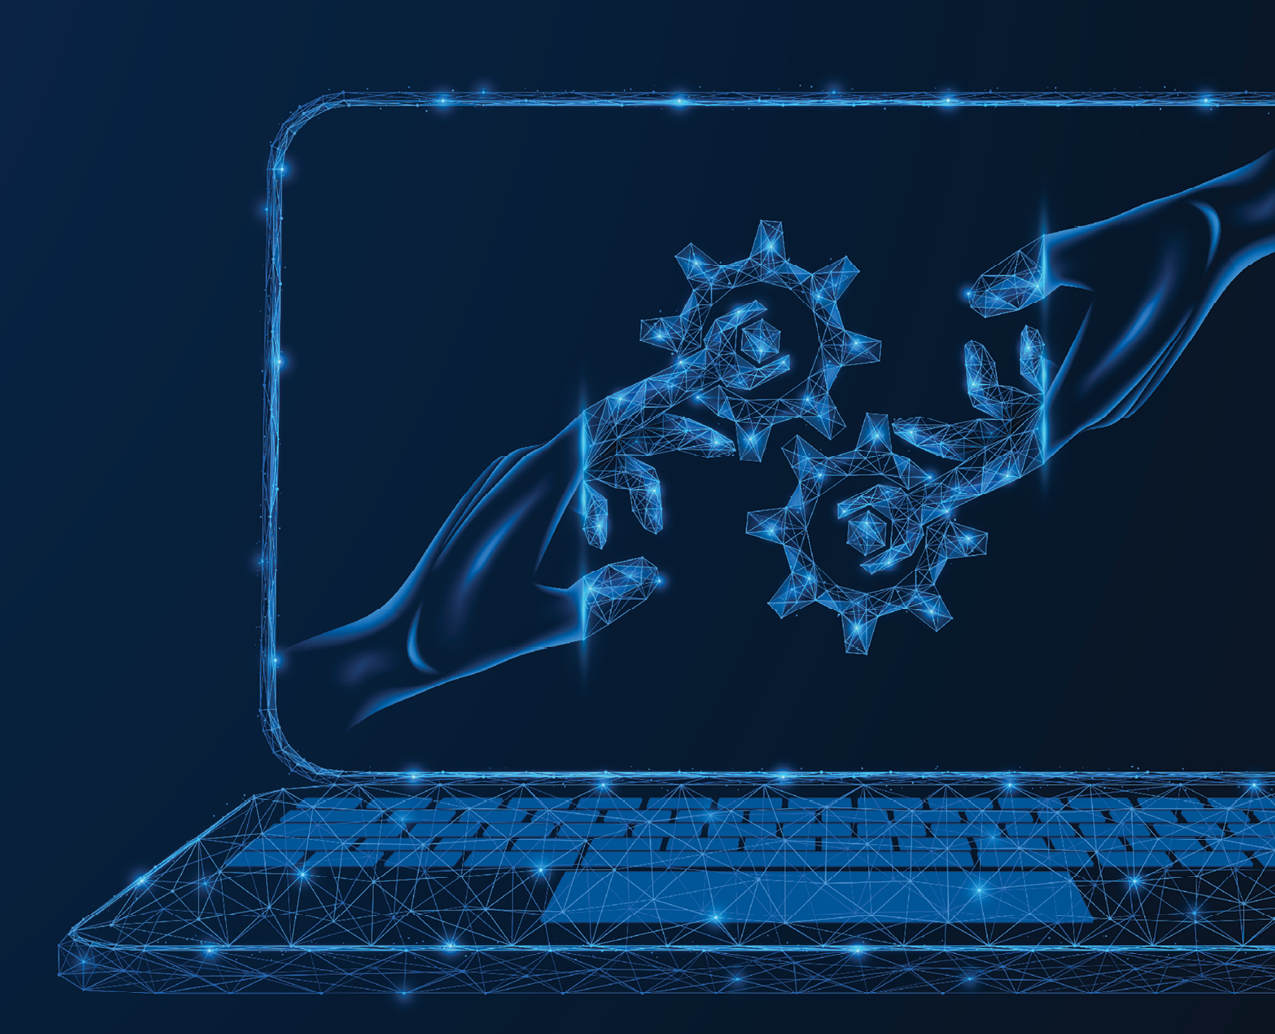 Low-poly illustration of a laptop with two hands turning into gears and coming together on the computer screen